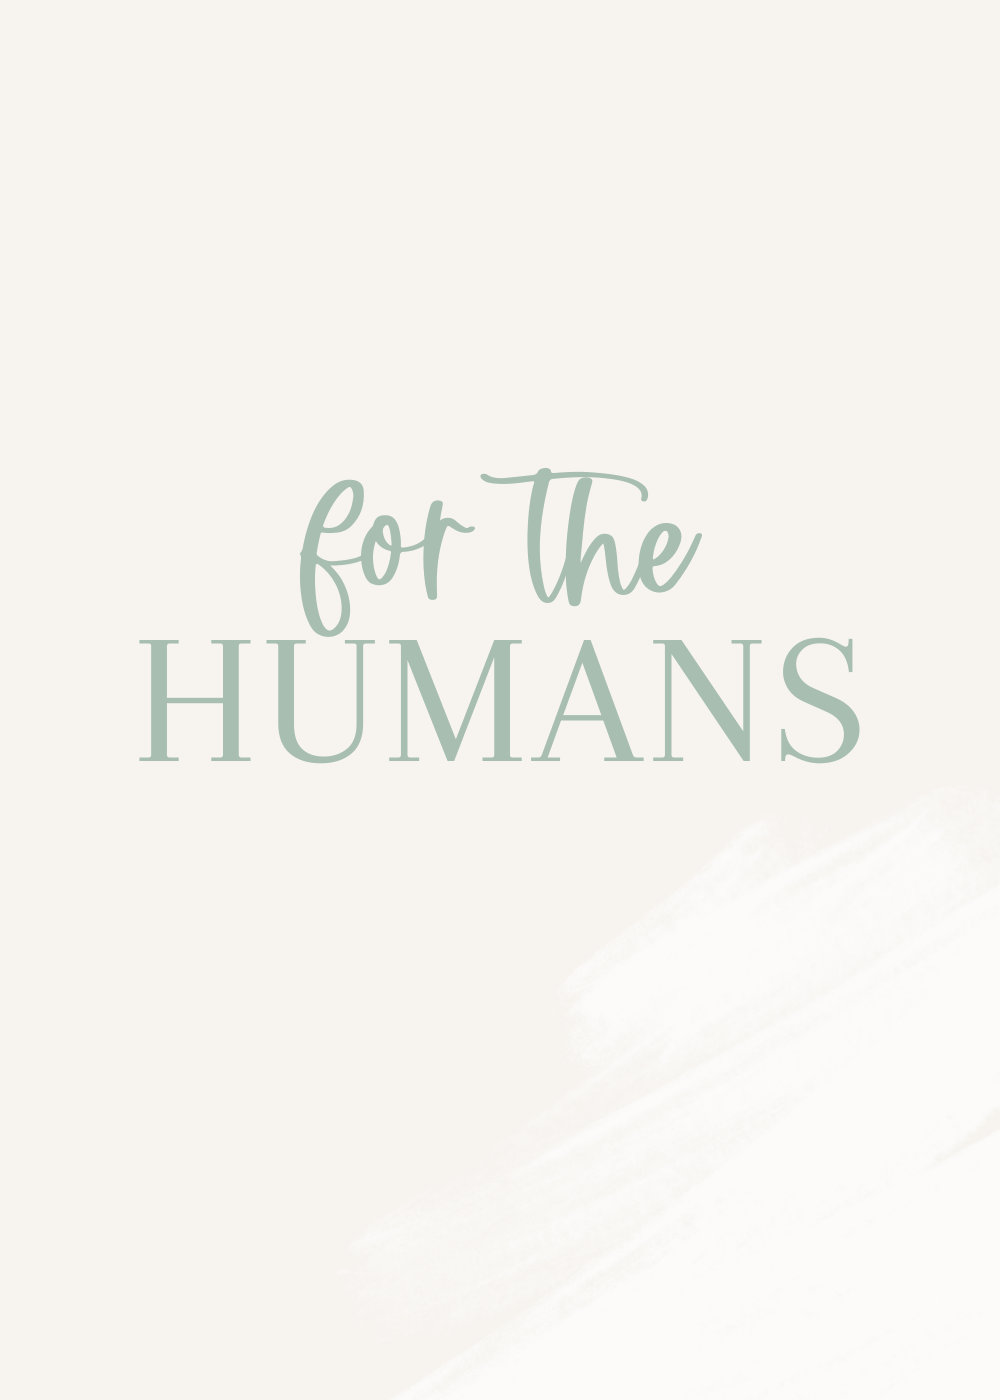 For the humans